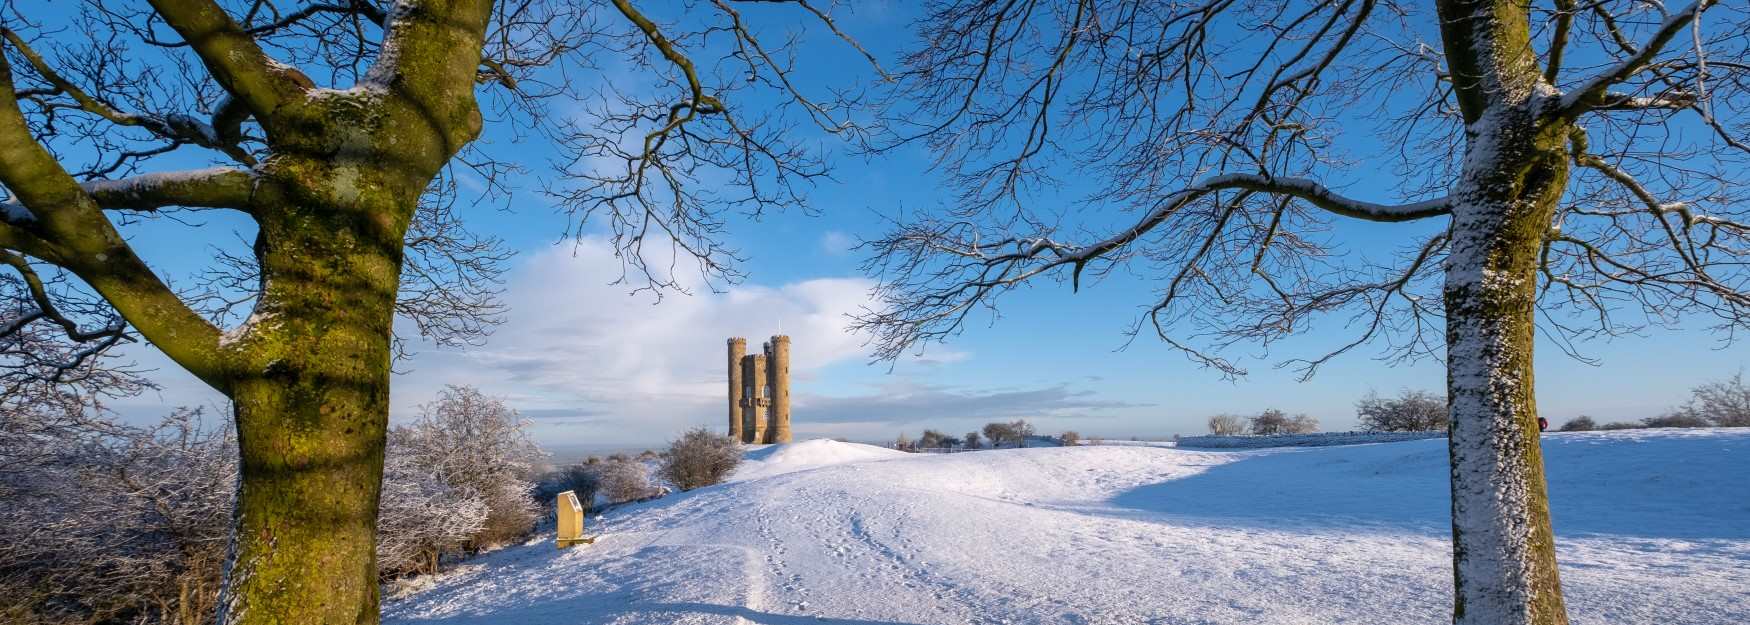 Broadway Tower in the snow